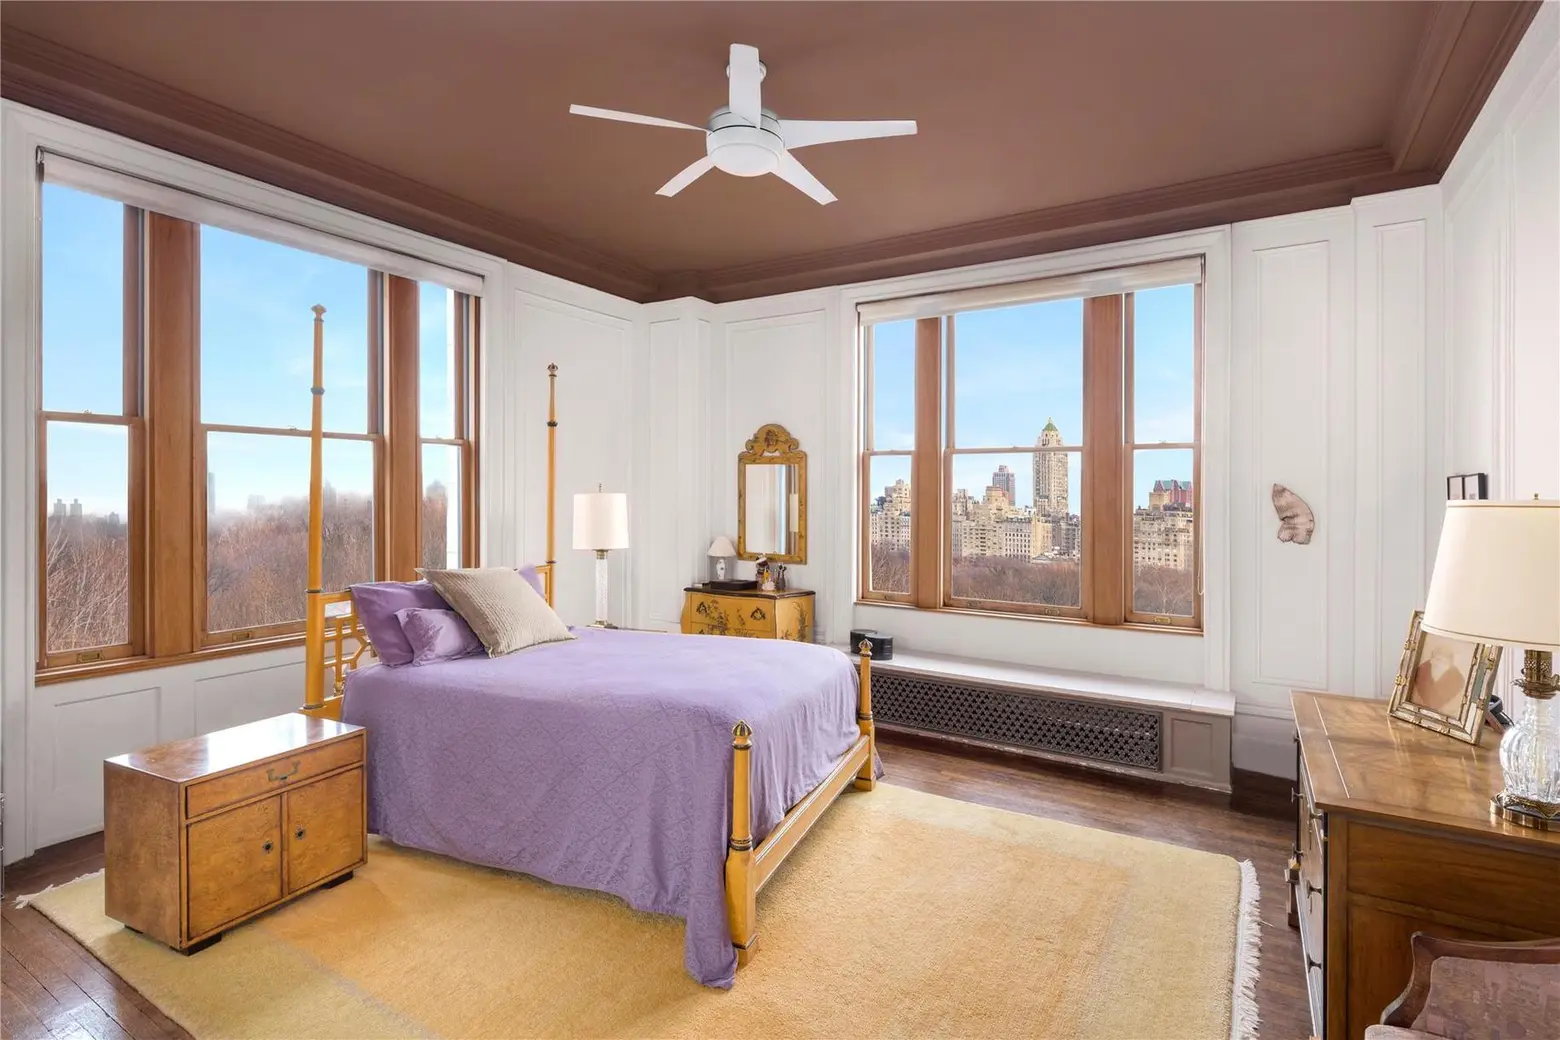 88 Central Park West, Brentmore, CPW, Manhattan Co-op for sale, cool listings, Lincoln Square, Upper West Side, big tickets